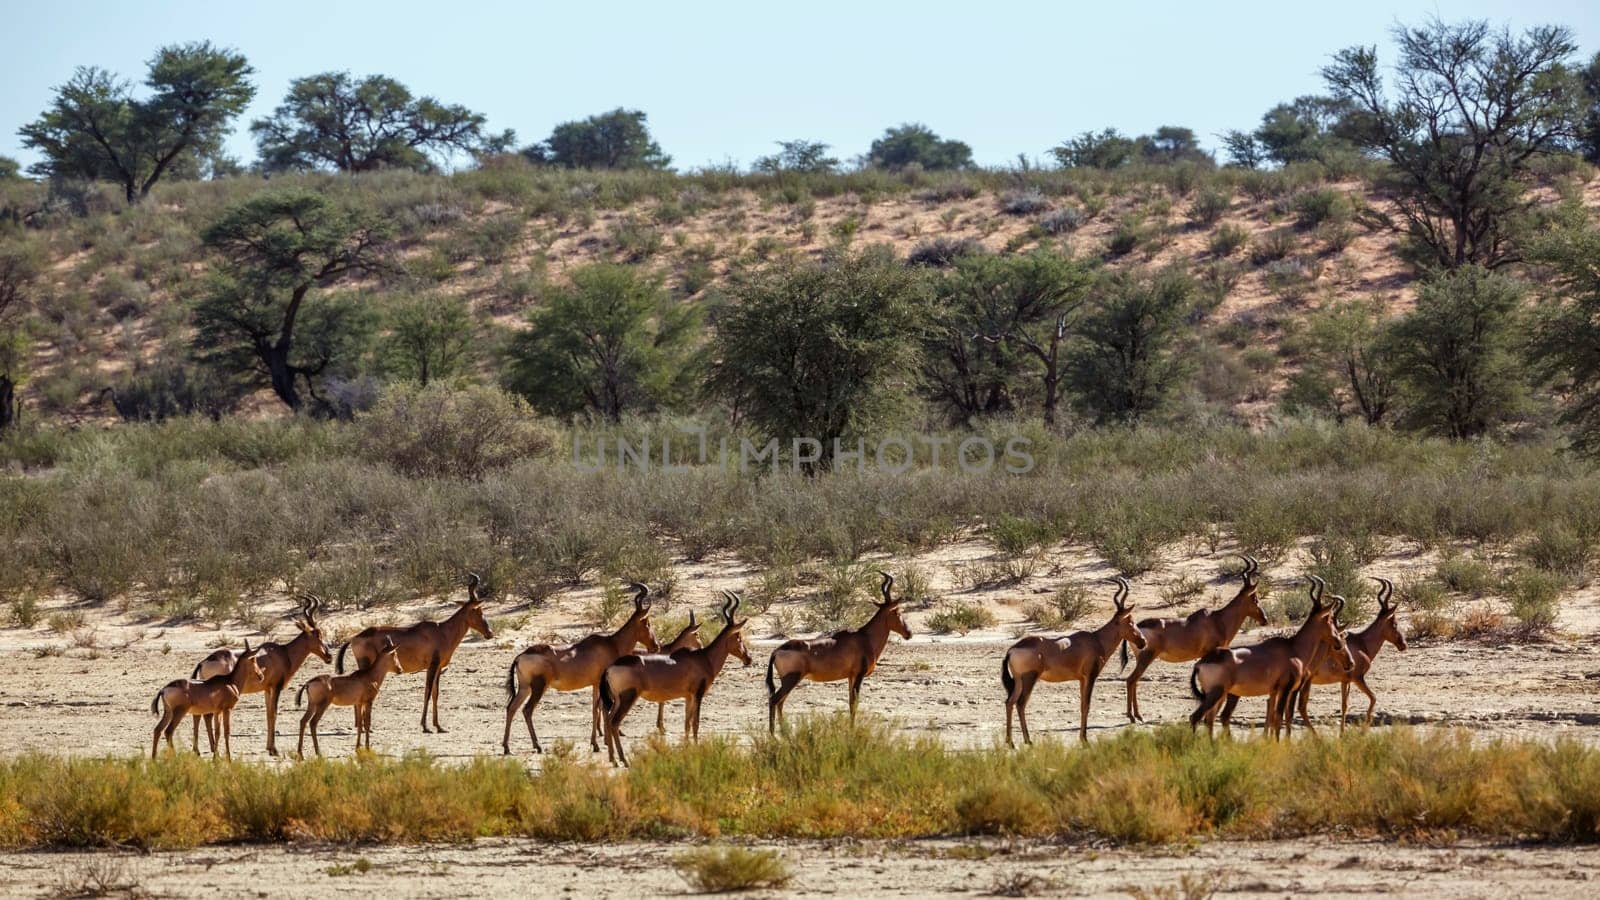 Small group of Hartebeest in dry land scenery in Kgalagadi transfrontier park, South Africa; specie Alcelaphus buselaphus family of Bovidae